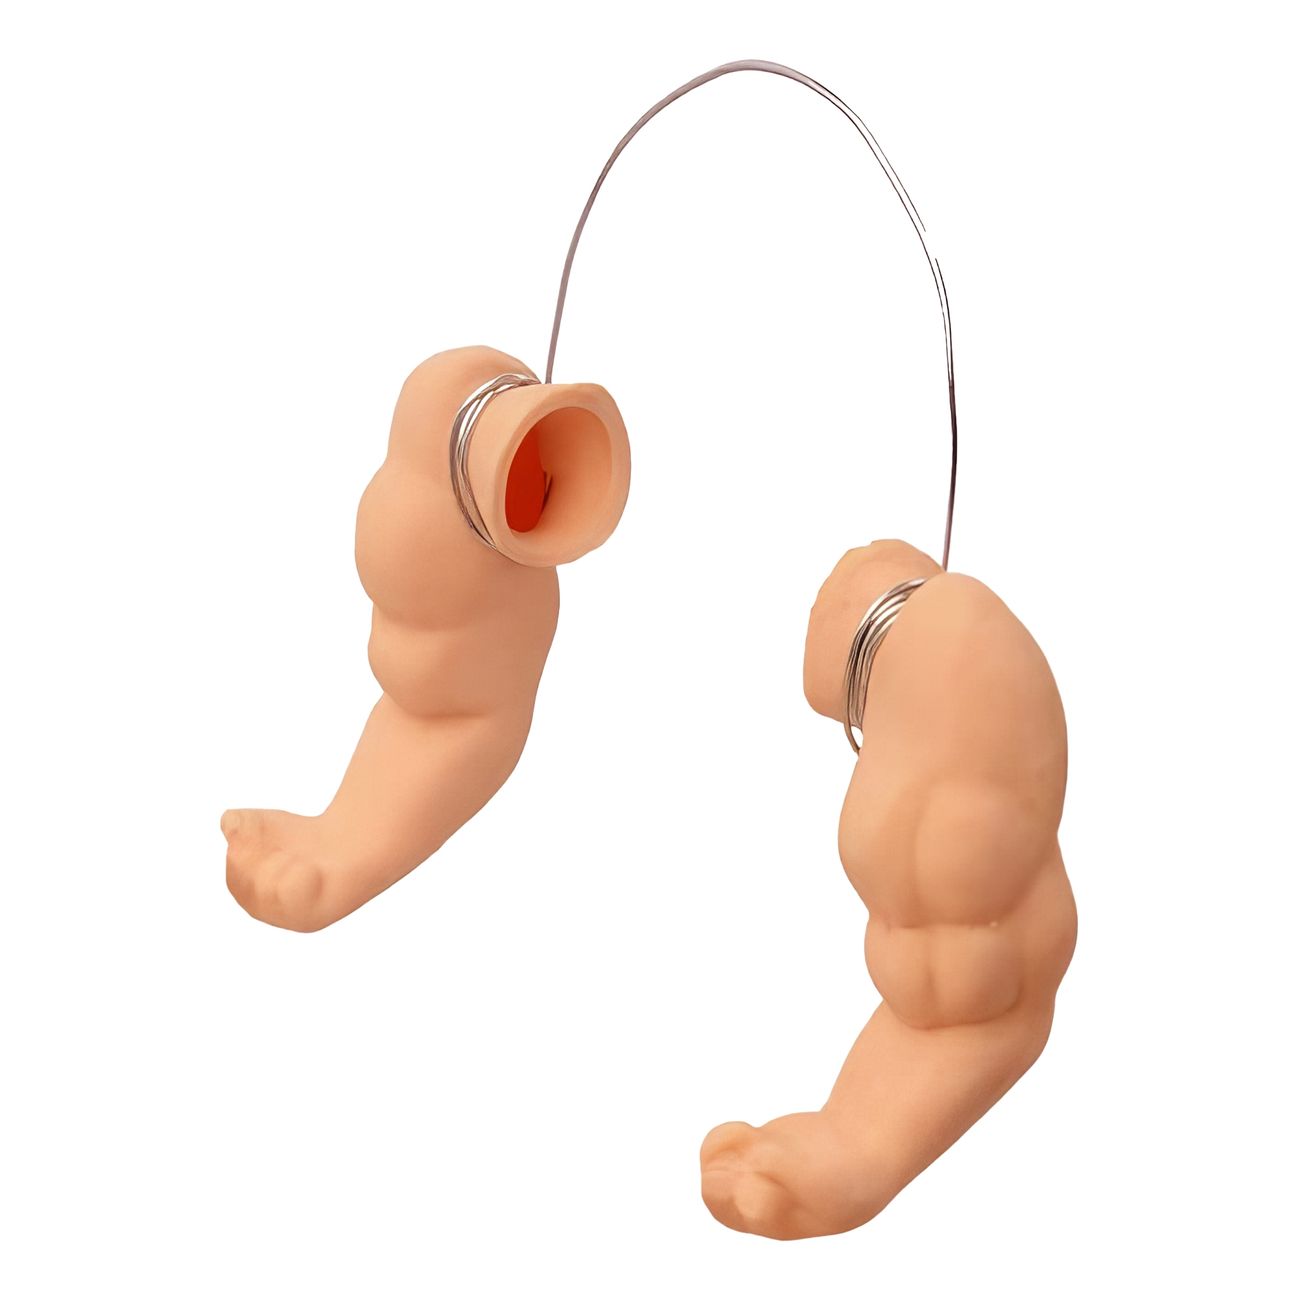 muscle-chicken-toy-arm-100163-2